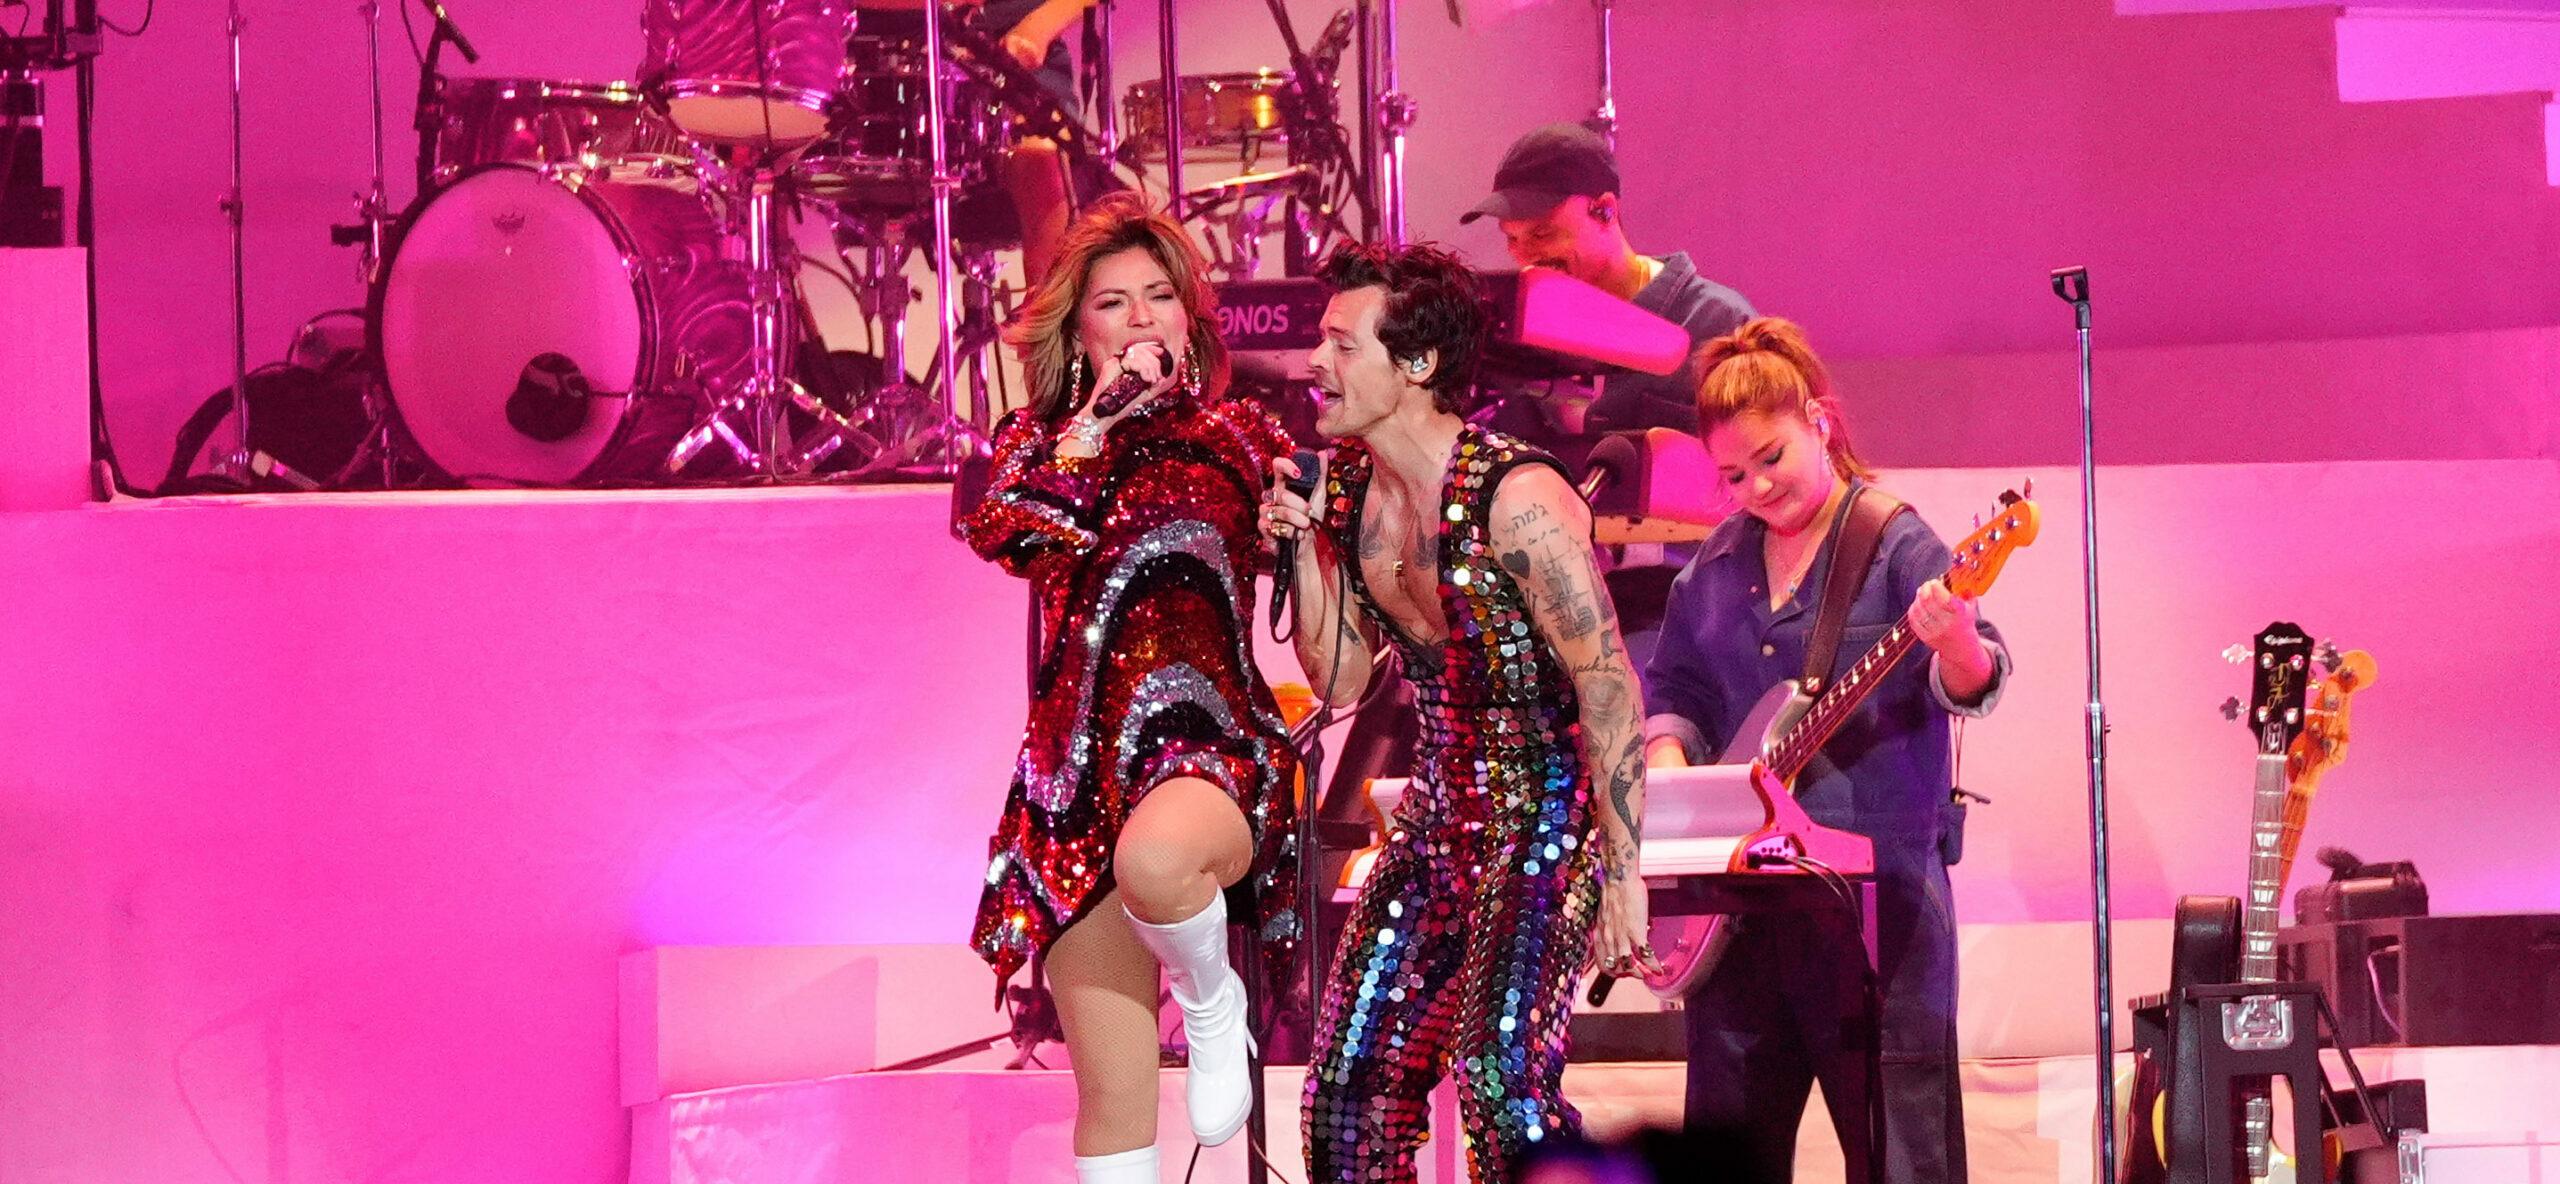 Harry Styles and Shania Twain performs together at Coachella Music Festival in Indio CA